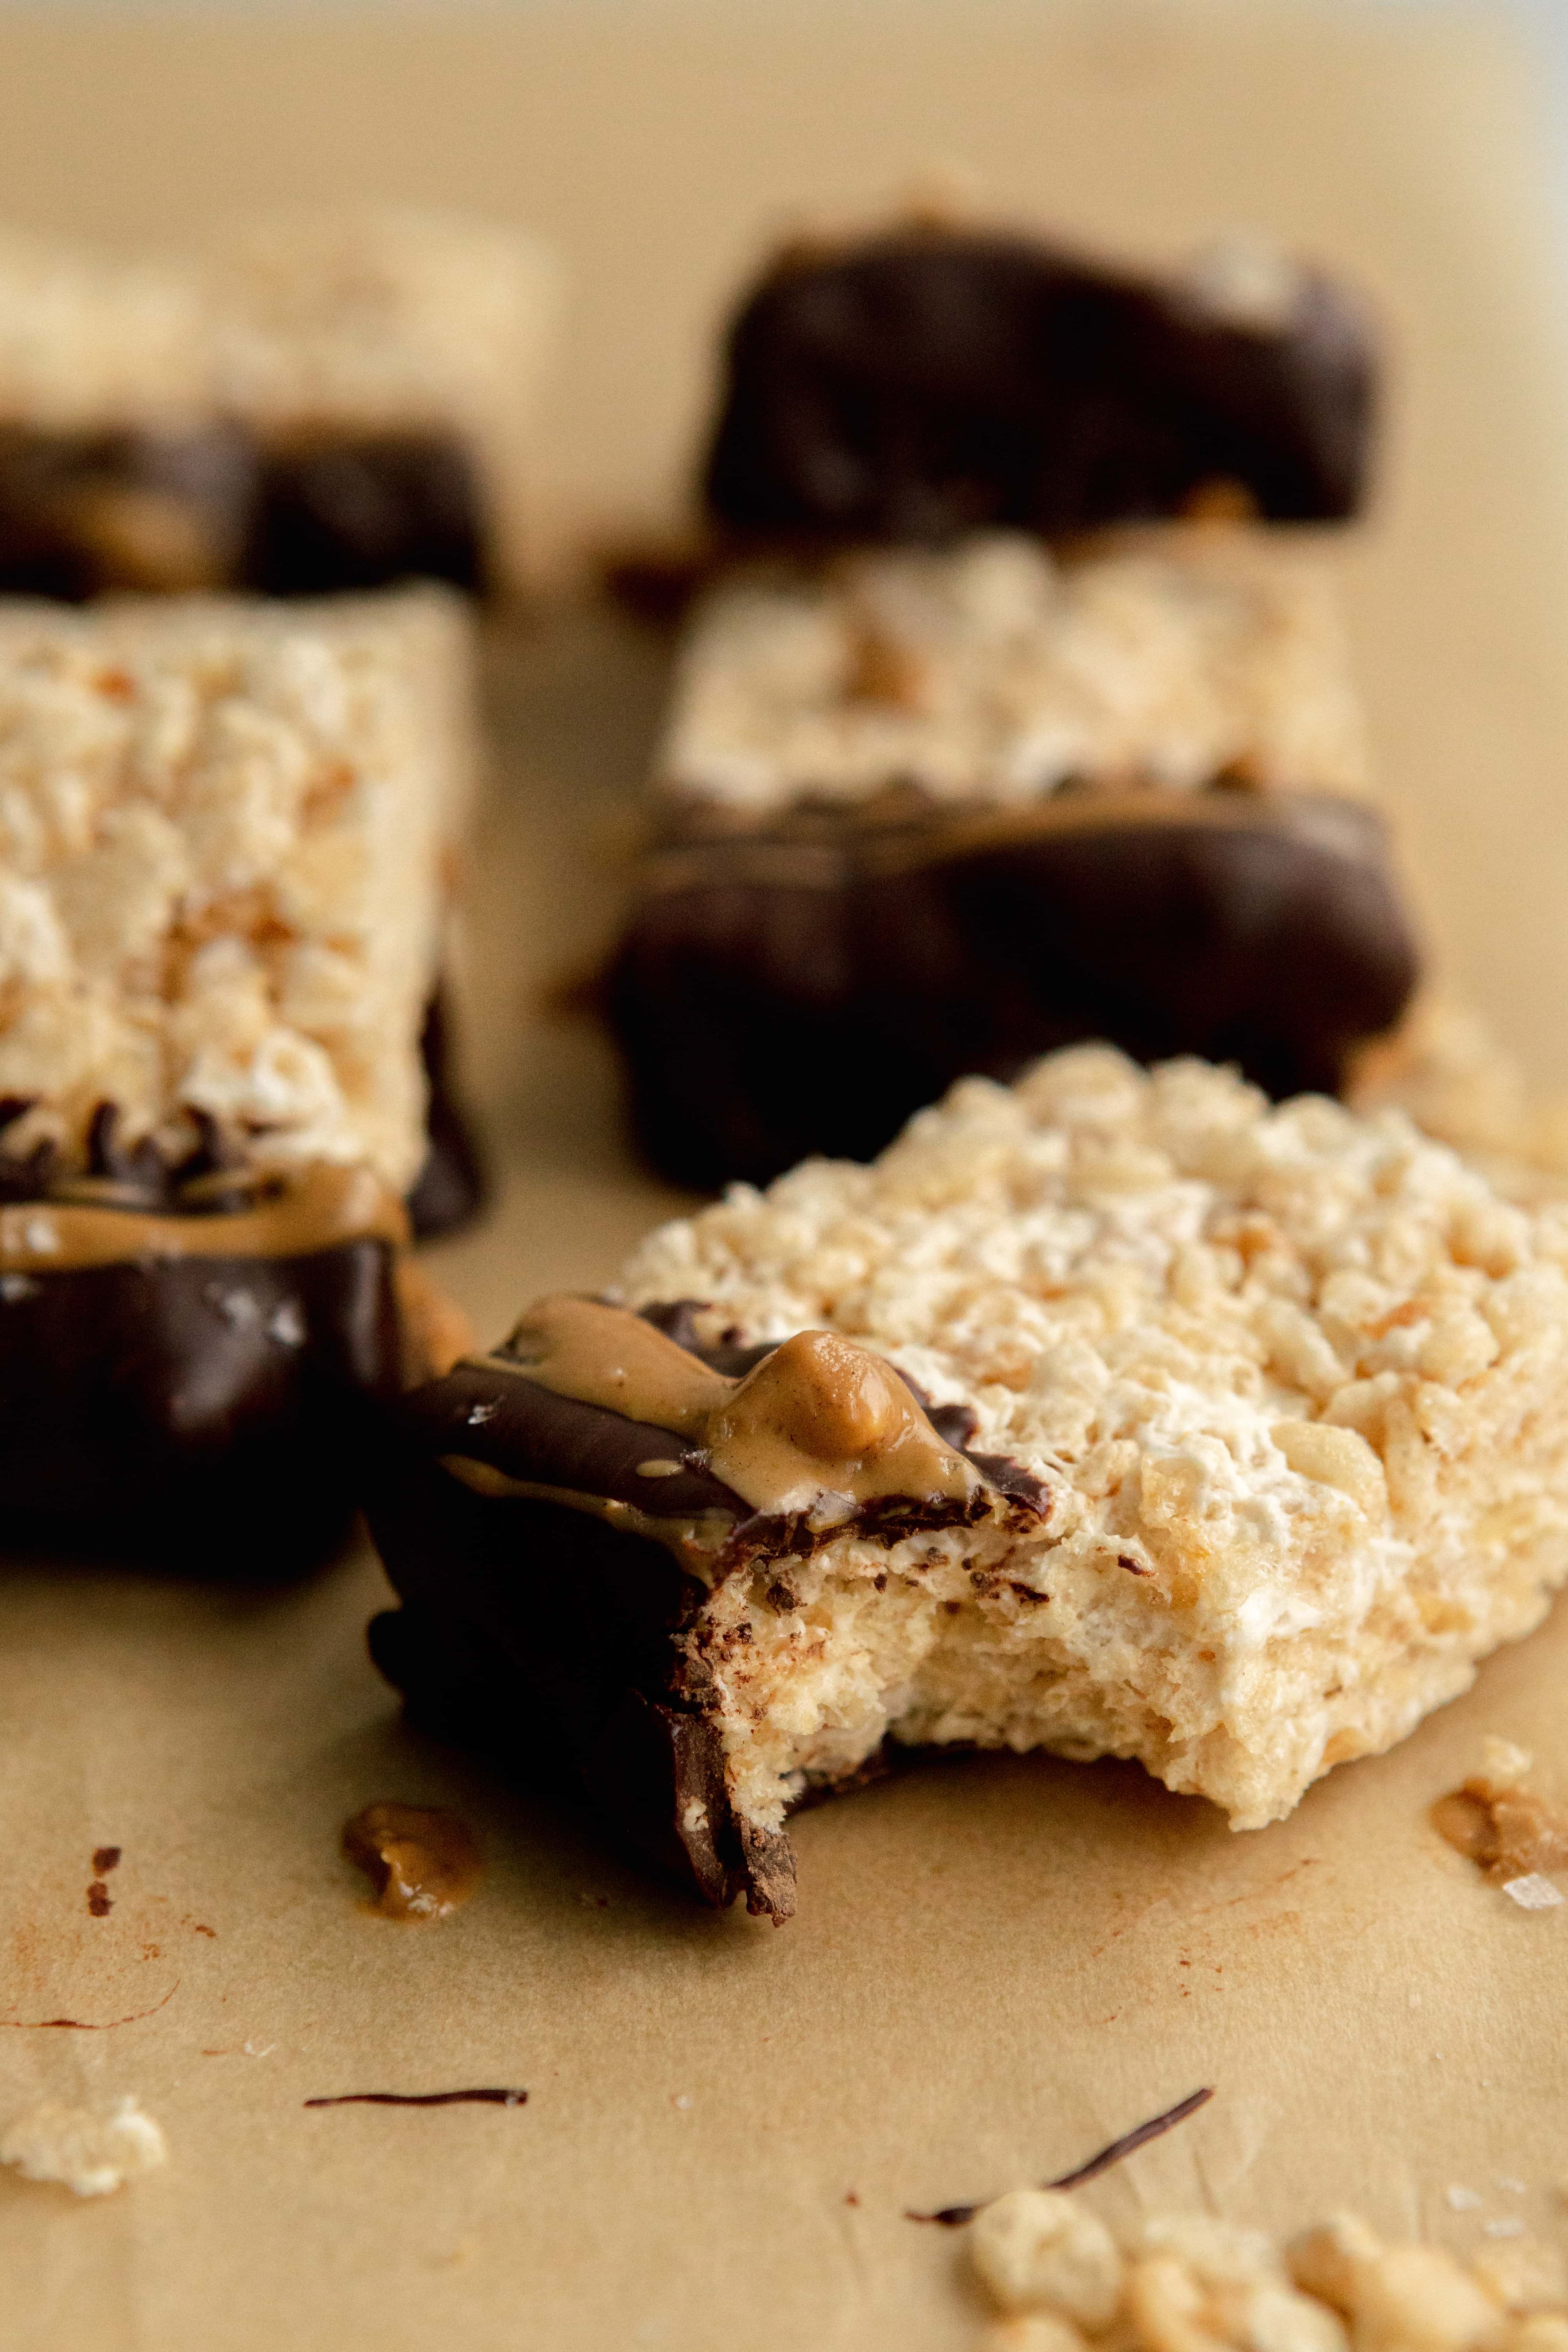 Vegan Rice Krispie Treat with Chocolate and Peanut Butter Bite | The Hangry Chickpea